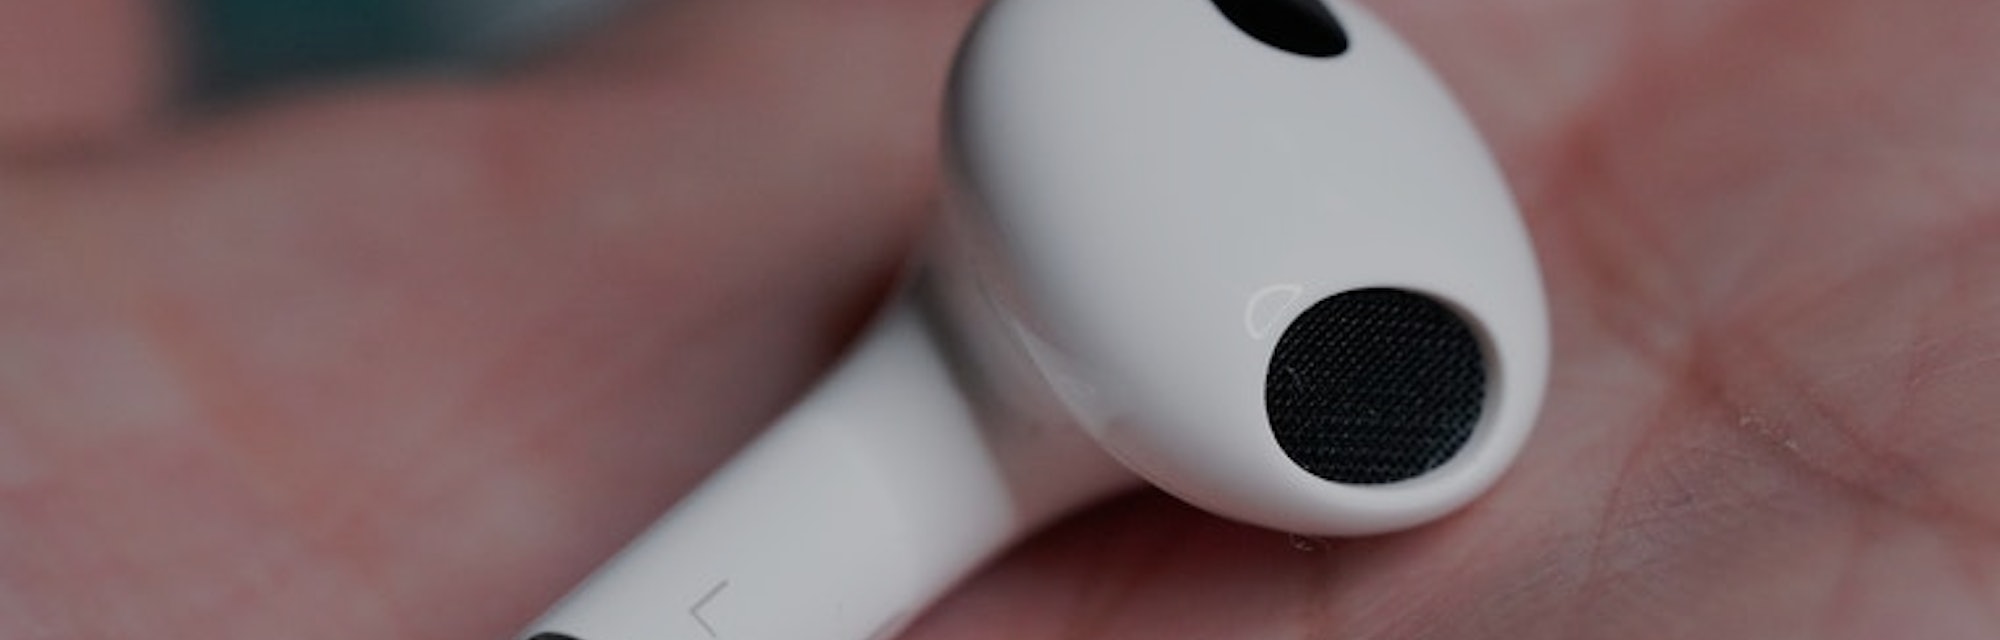 How to factory reset your AirPods to fix any issues